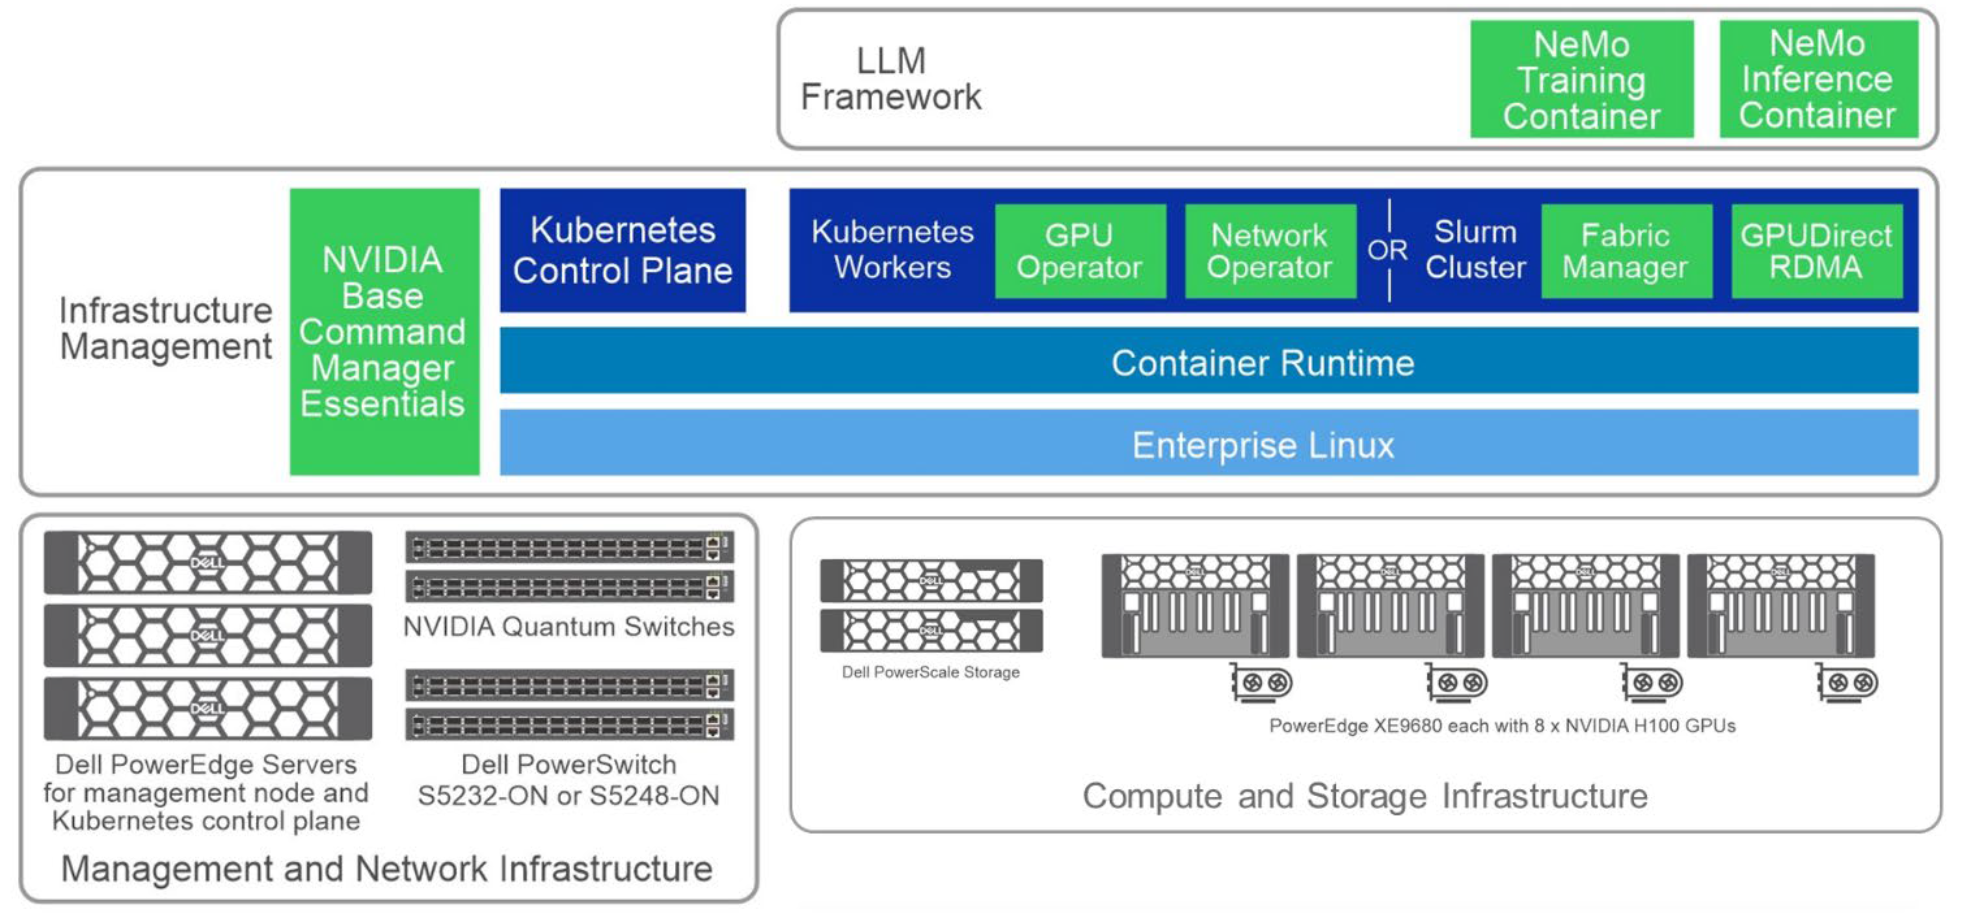 This image provides a high level overview for the solution architecture including LLM Framework, Infrastructure Management, Management and Network Infrastructure and Compute and Storage Infrastructure information